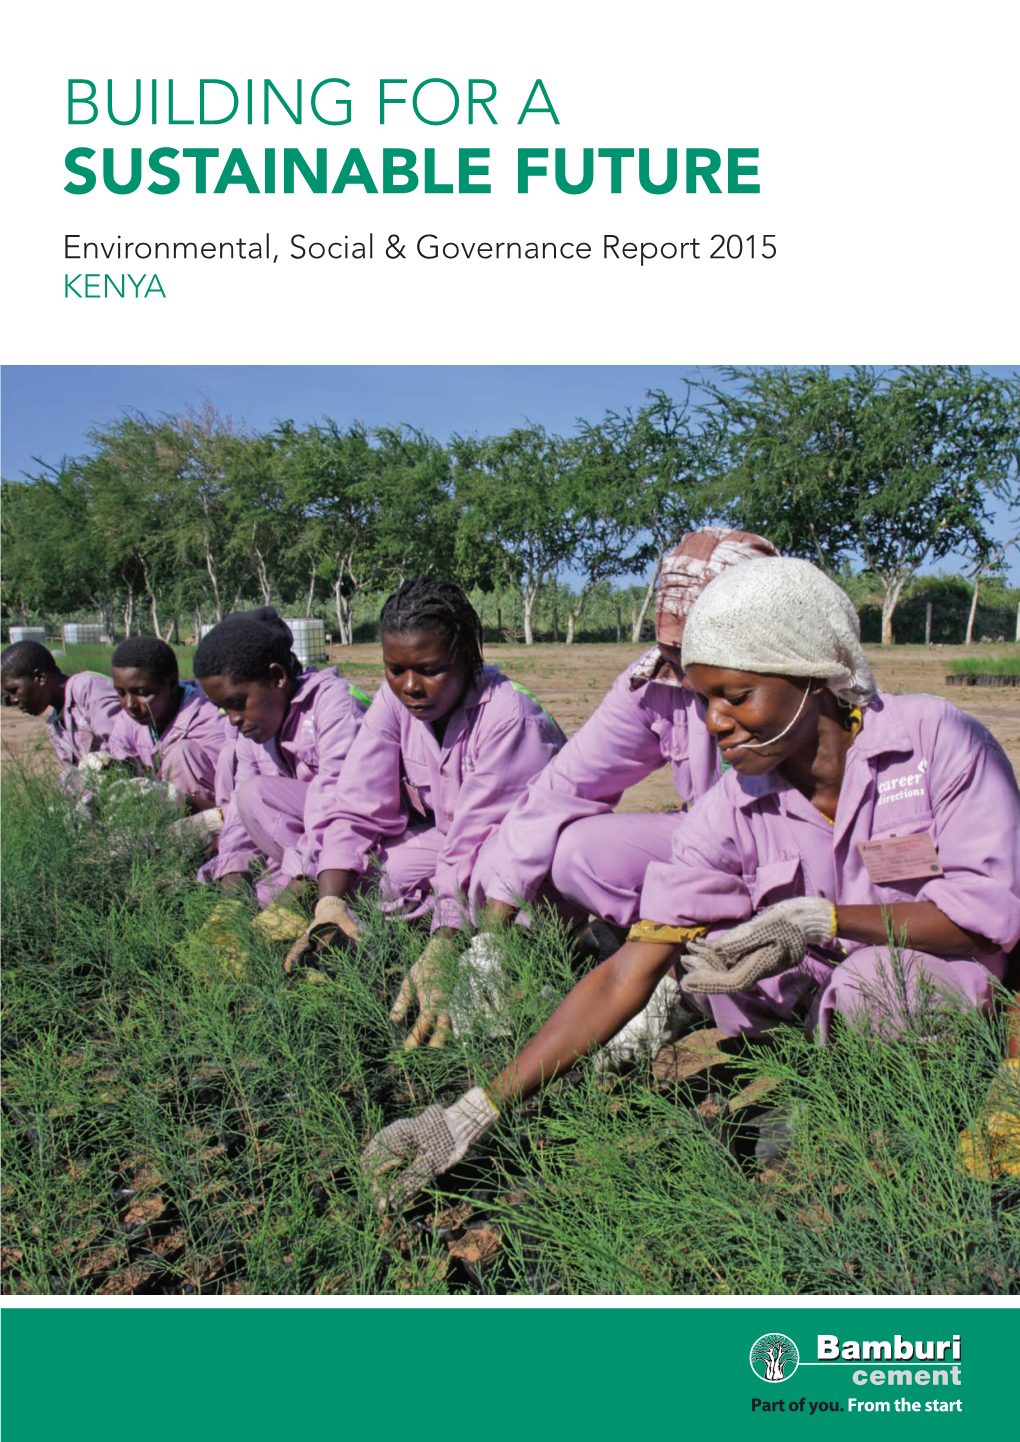 BUILDING for a SUSTAINABLE FUTURE Environmental, Social & Governance Report 2015 KENYA BAMBURI CEMENT 2 ESG REPORT 2015